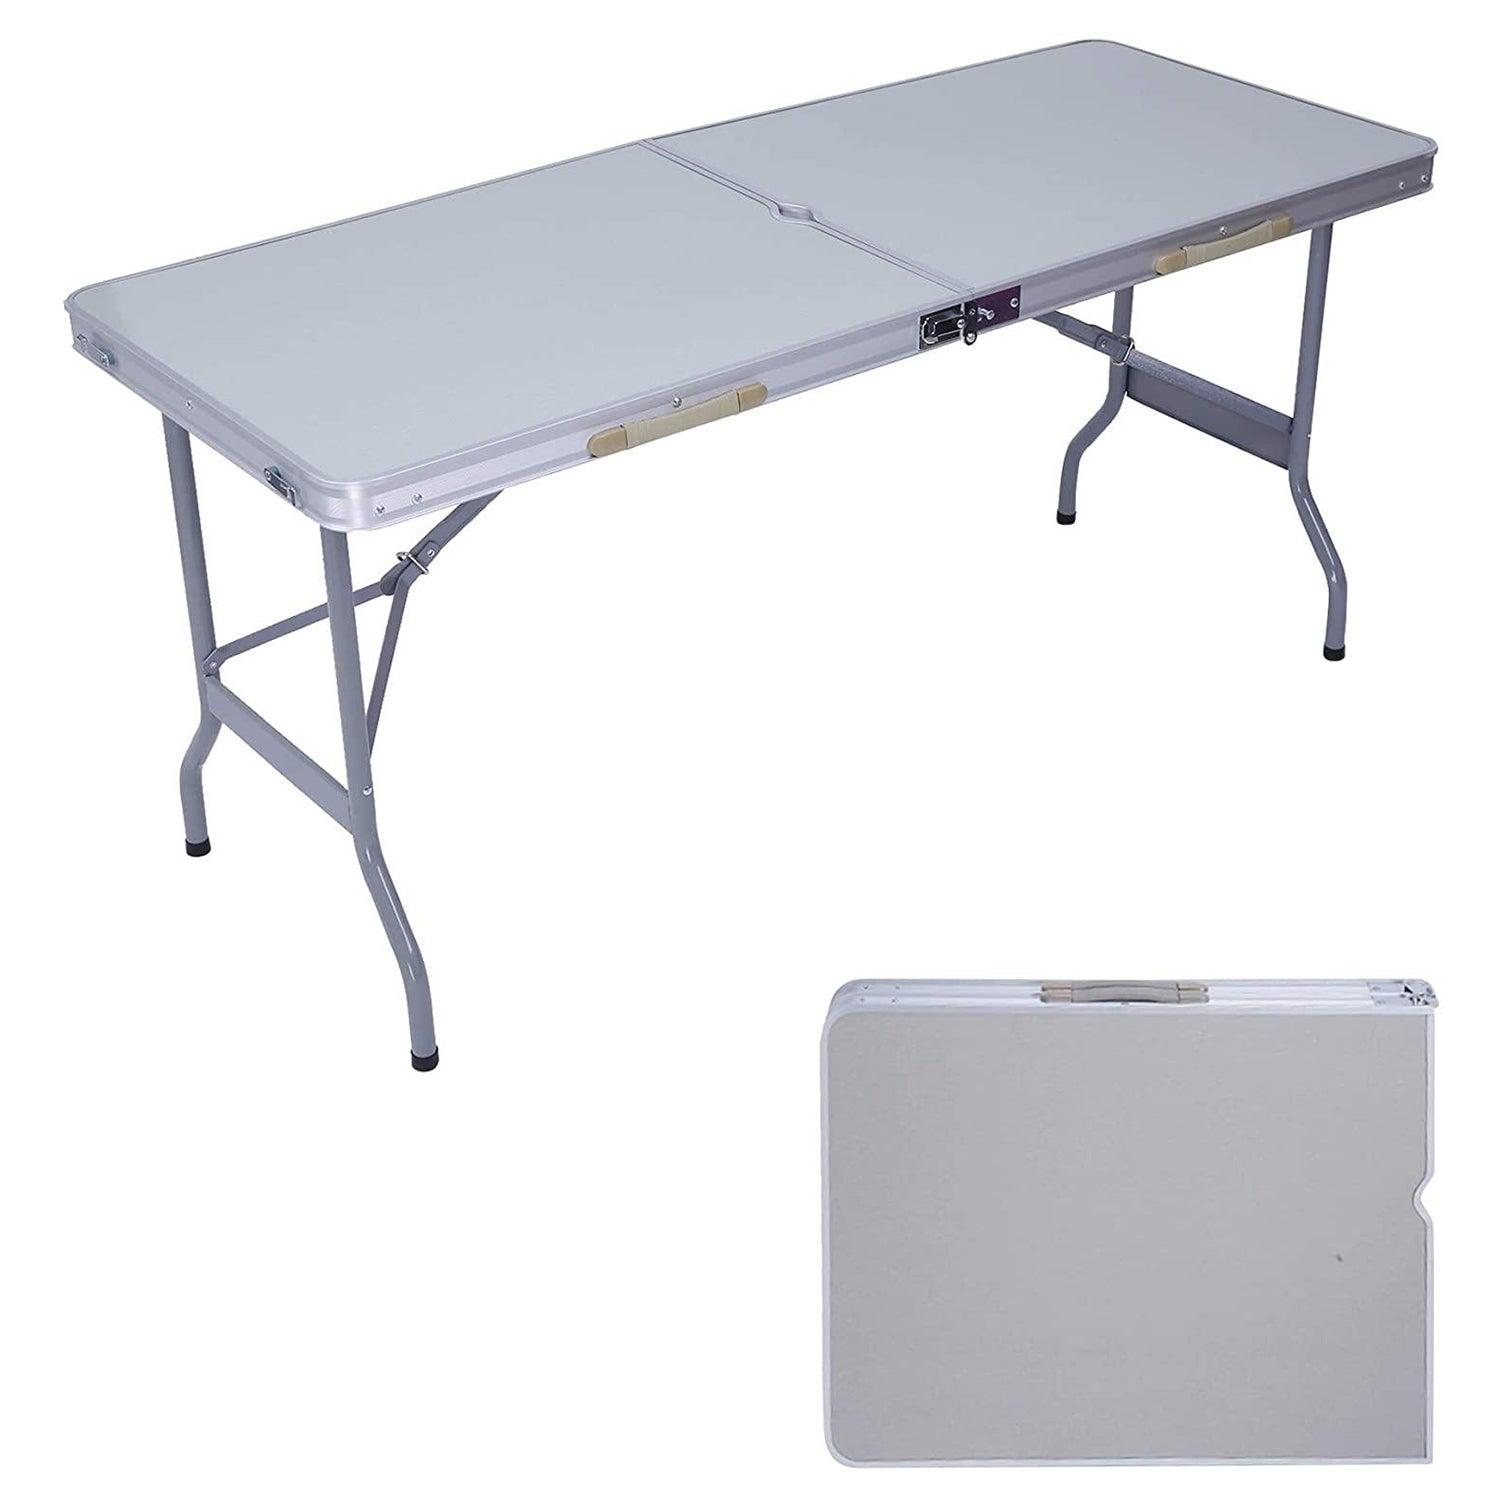 Portable Folding Aluminum Suitcase Table, Compact Camping Picnic Table with Umbrella Hole and Carrying Handle, Silver